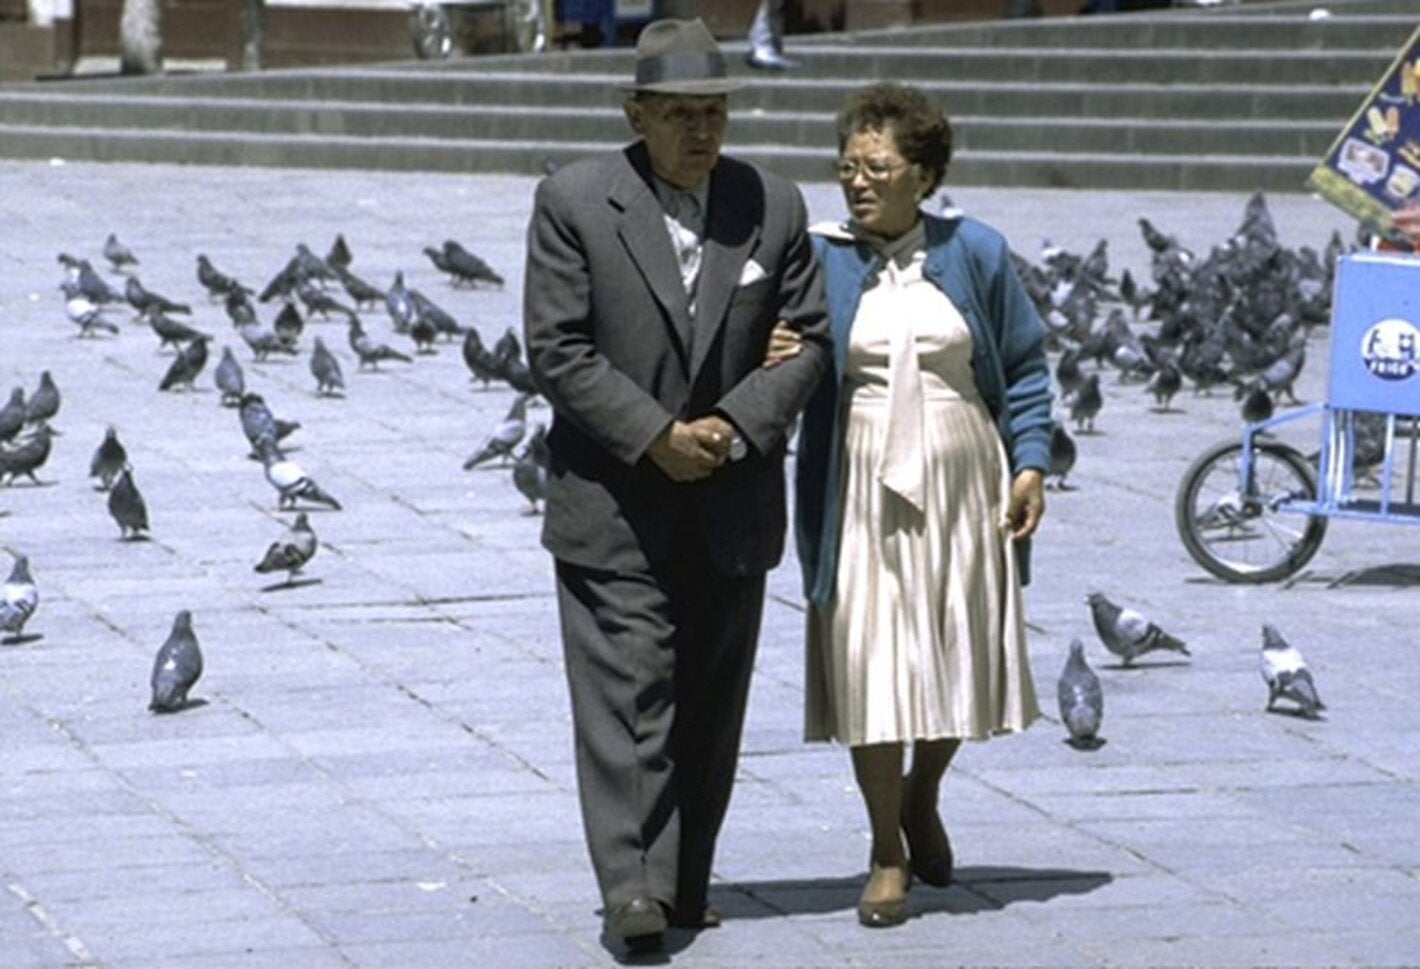 aging couple walking among pigeons in a plaza